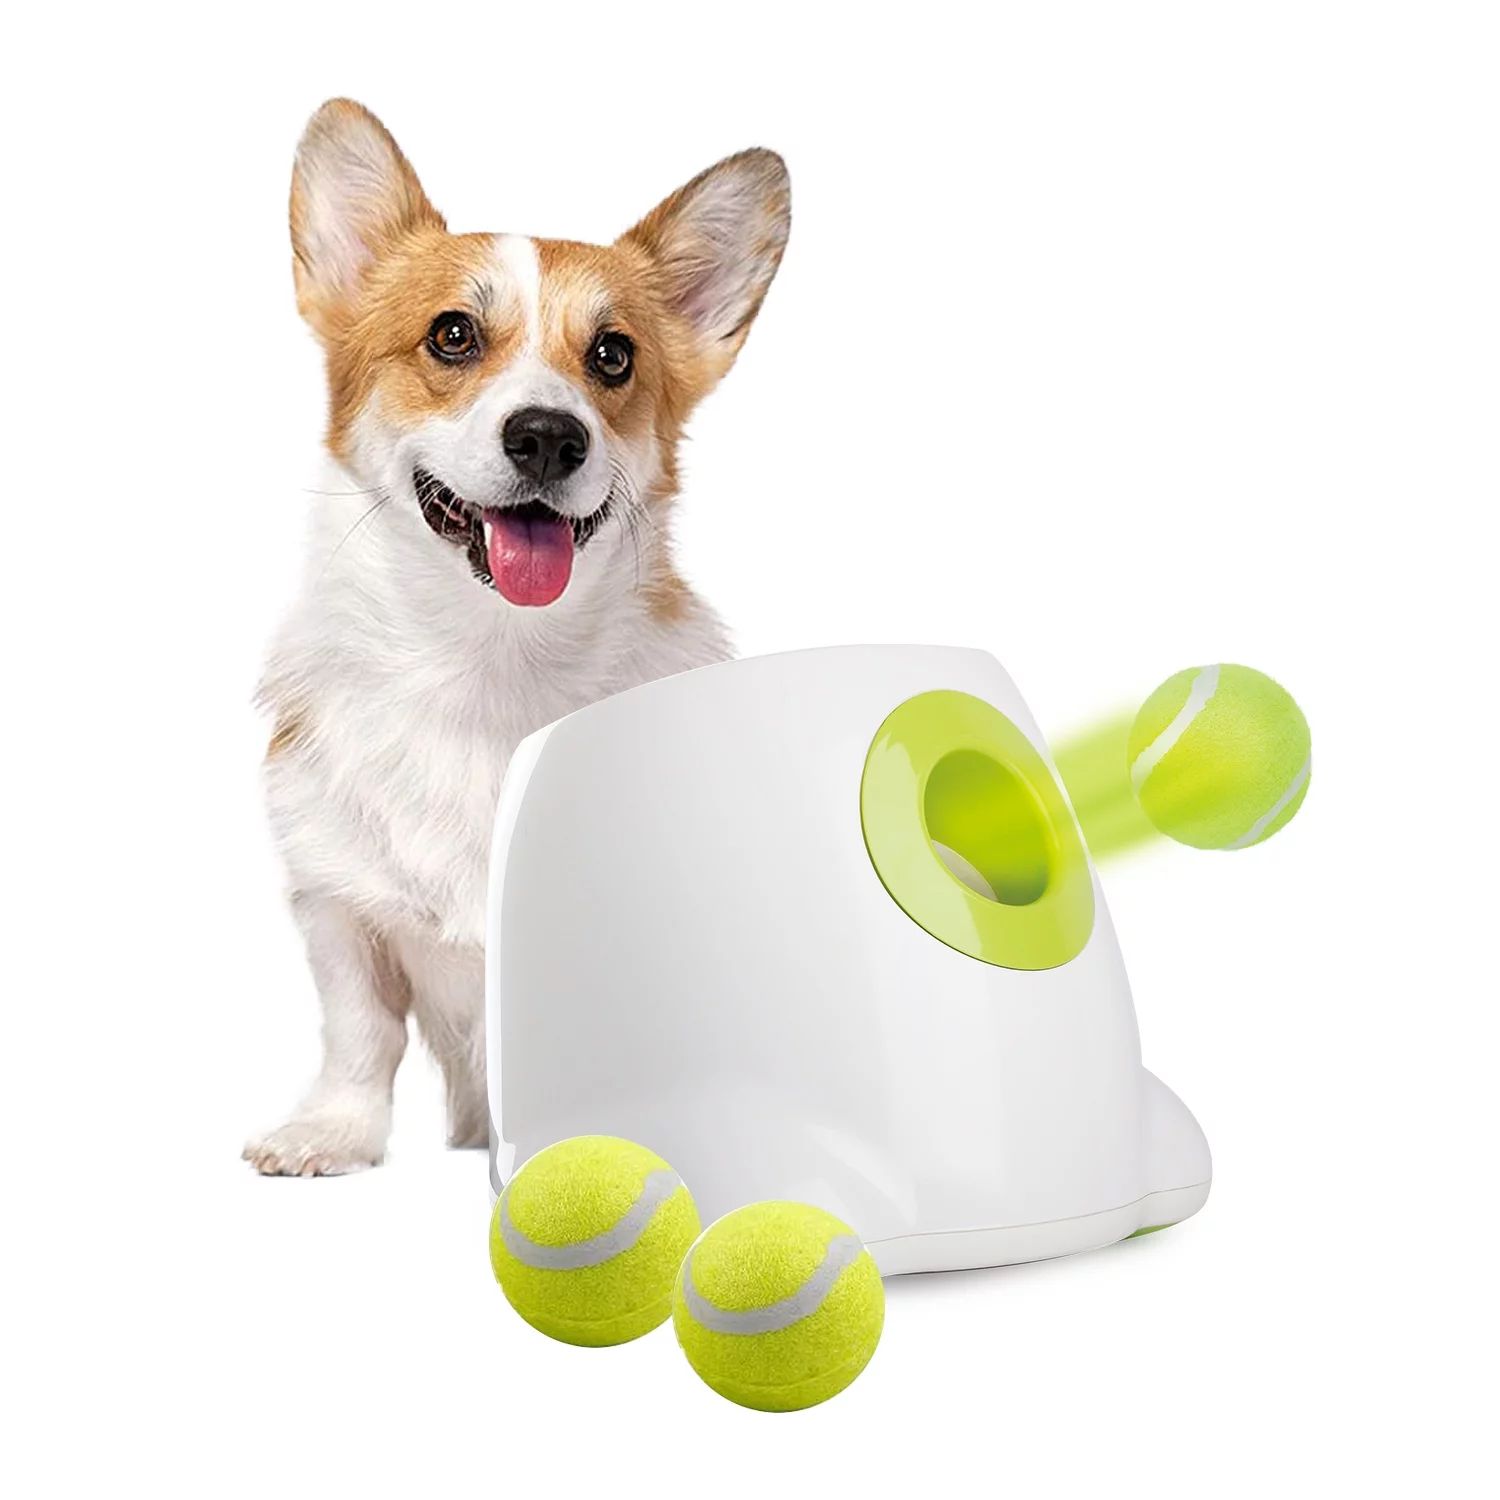 All For Paws Automatic Tennis Ball Launcher for Puppies & Small Dogs, 3 Balls Included | Walmart (US)